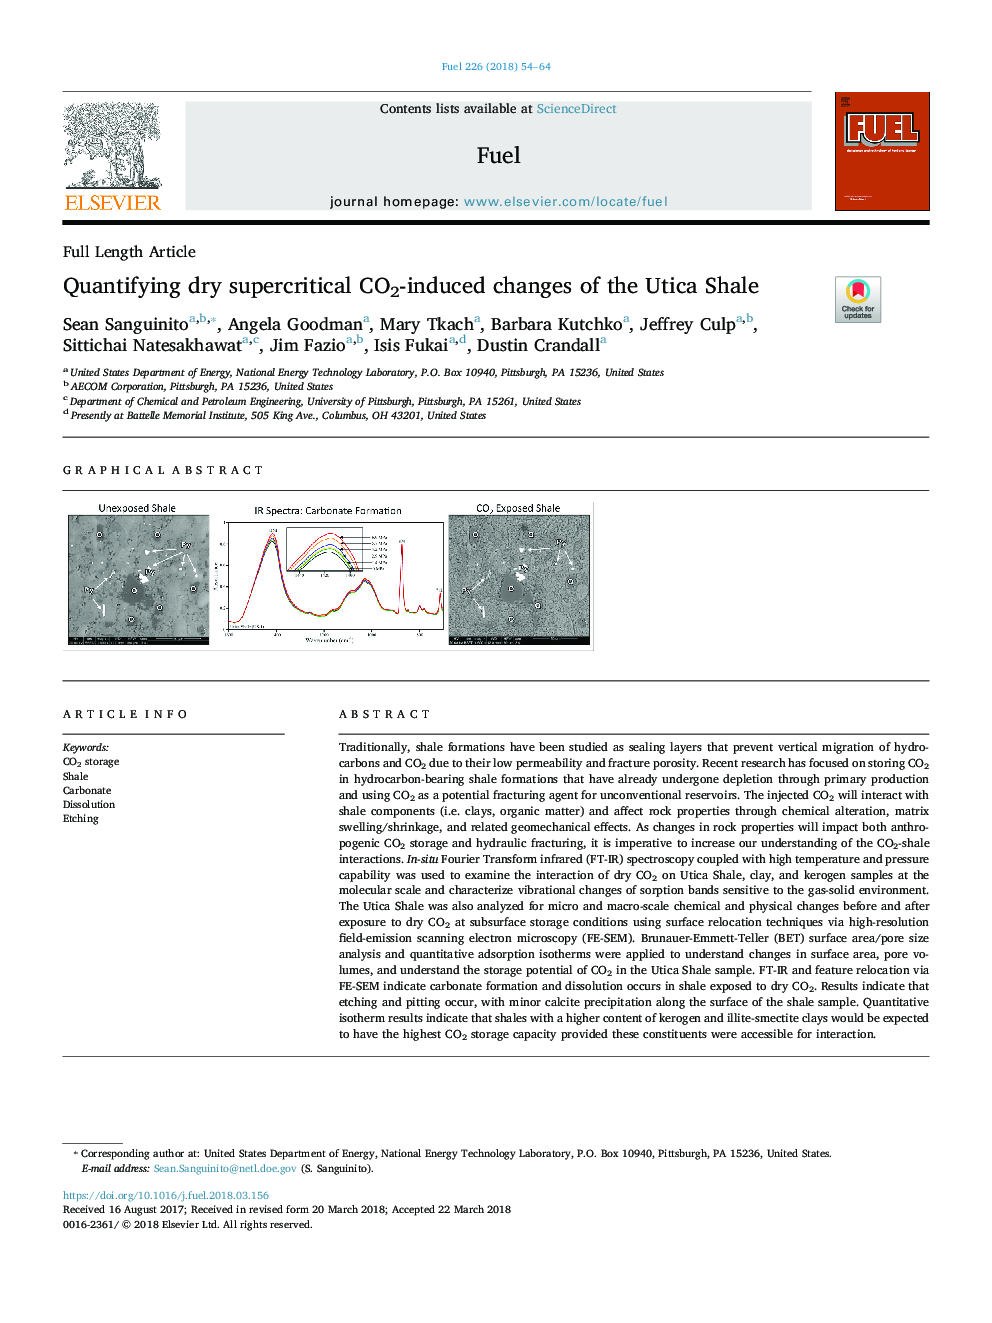 Quantifying dry supercritical CO2-induced changes of the Utica Shale